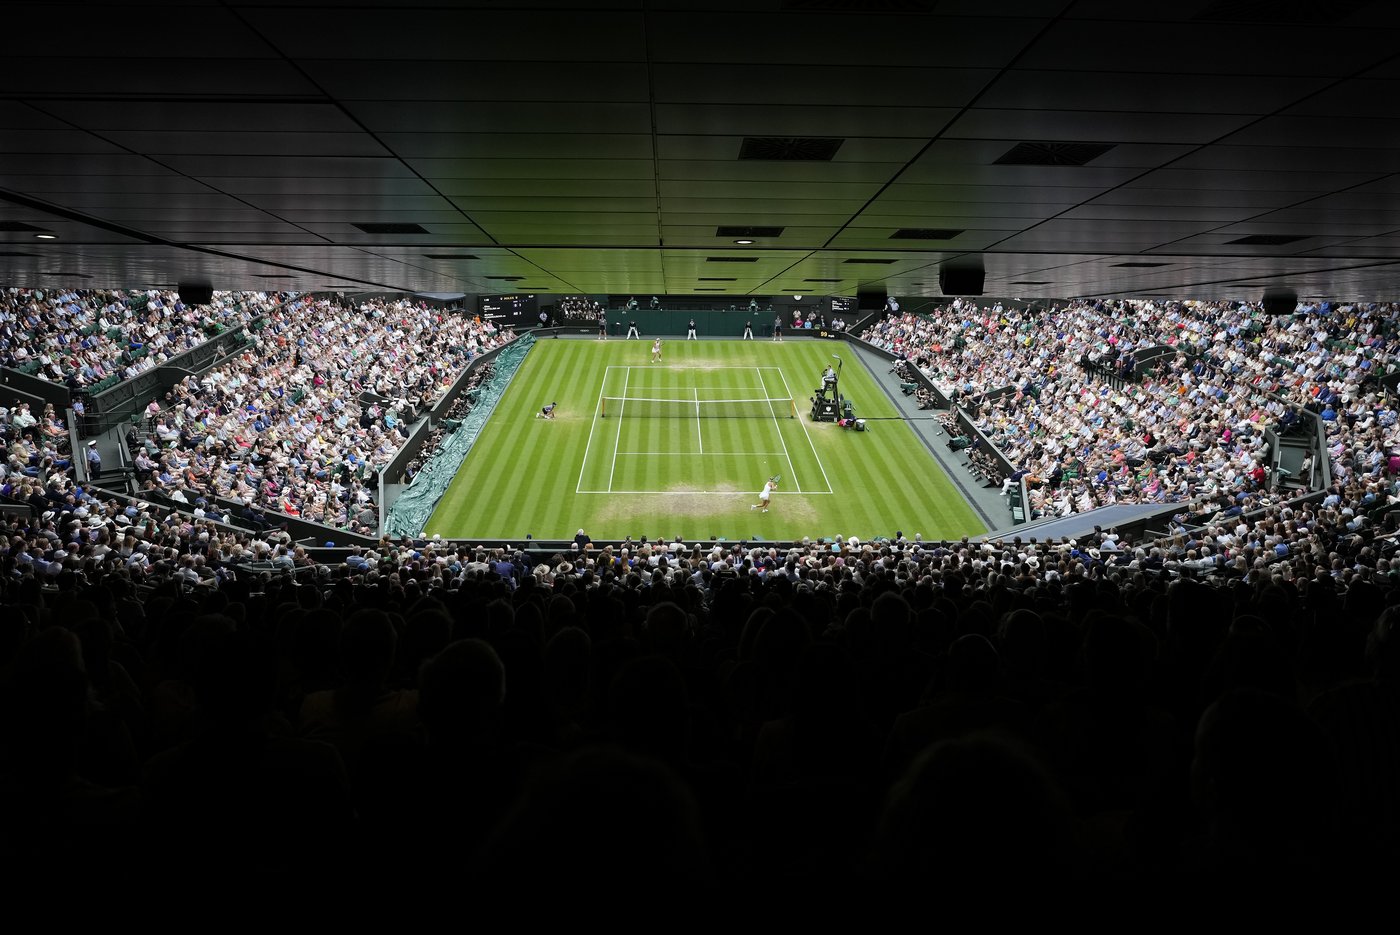 Wimbledon prize money is increasing to a record 50 million pounds. That